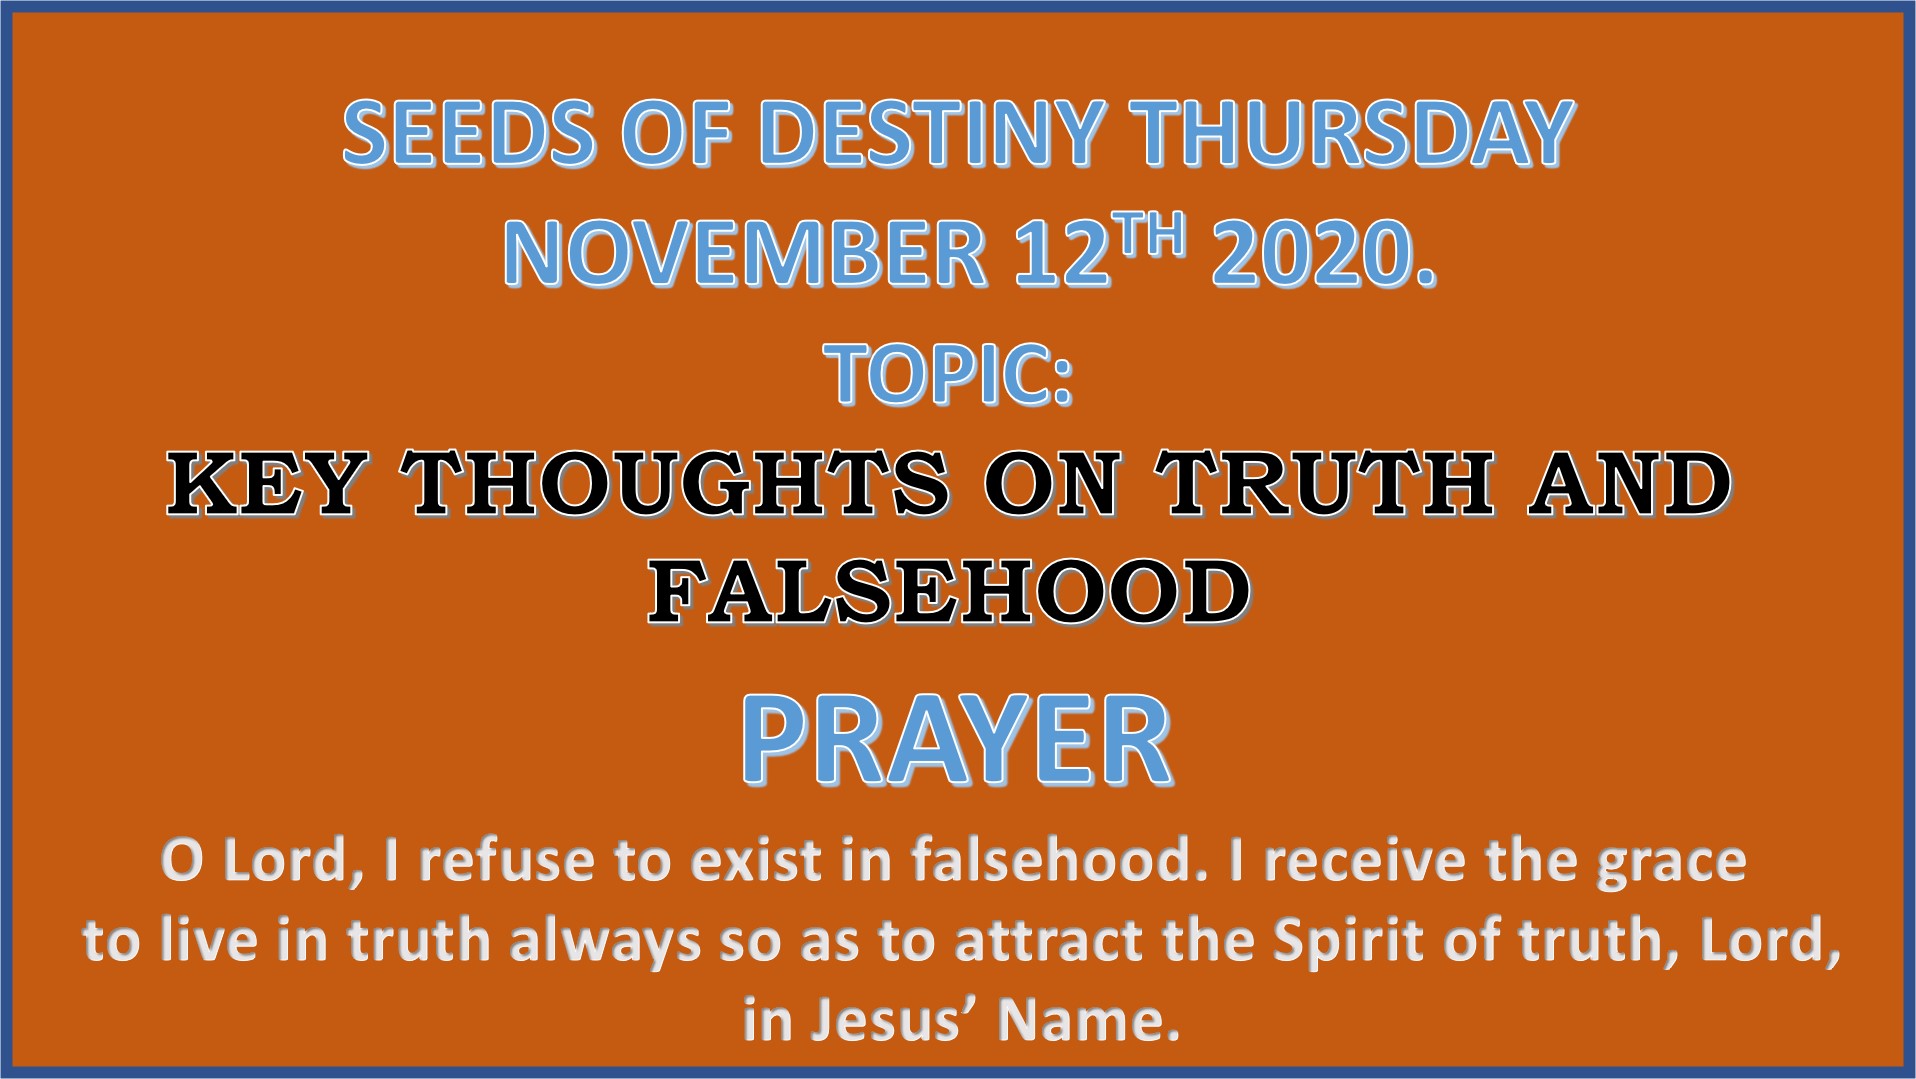 Seeds of Destiny Thursday 12th November 2020 by Dr Paul Enenche